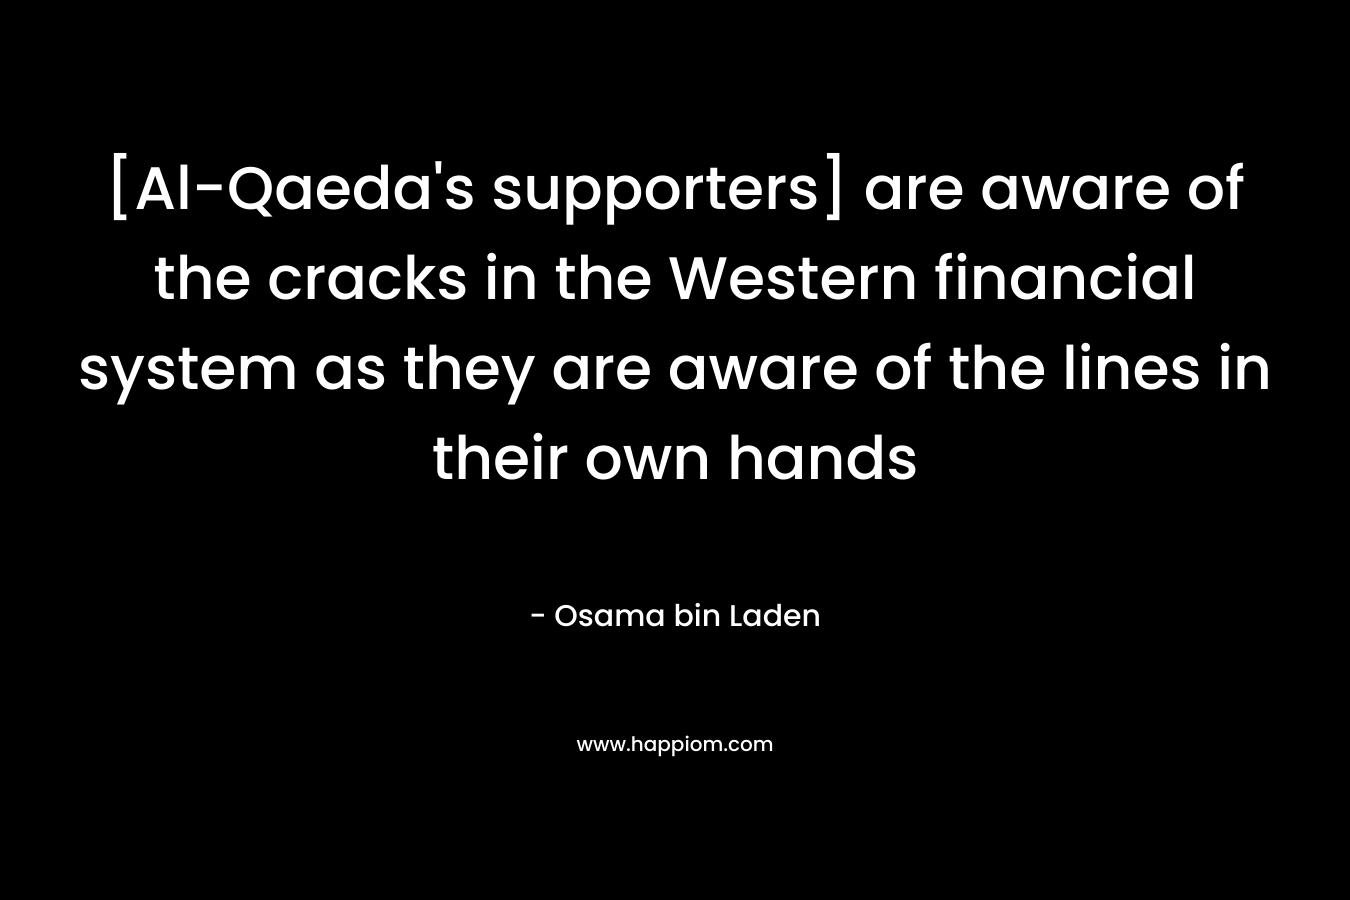 [Al-Qaeda’s supporters] are aware of the cracks in the Western financial system as they are aware of the lines in their own hands – Osama bin Laden